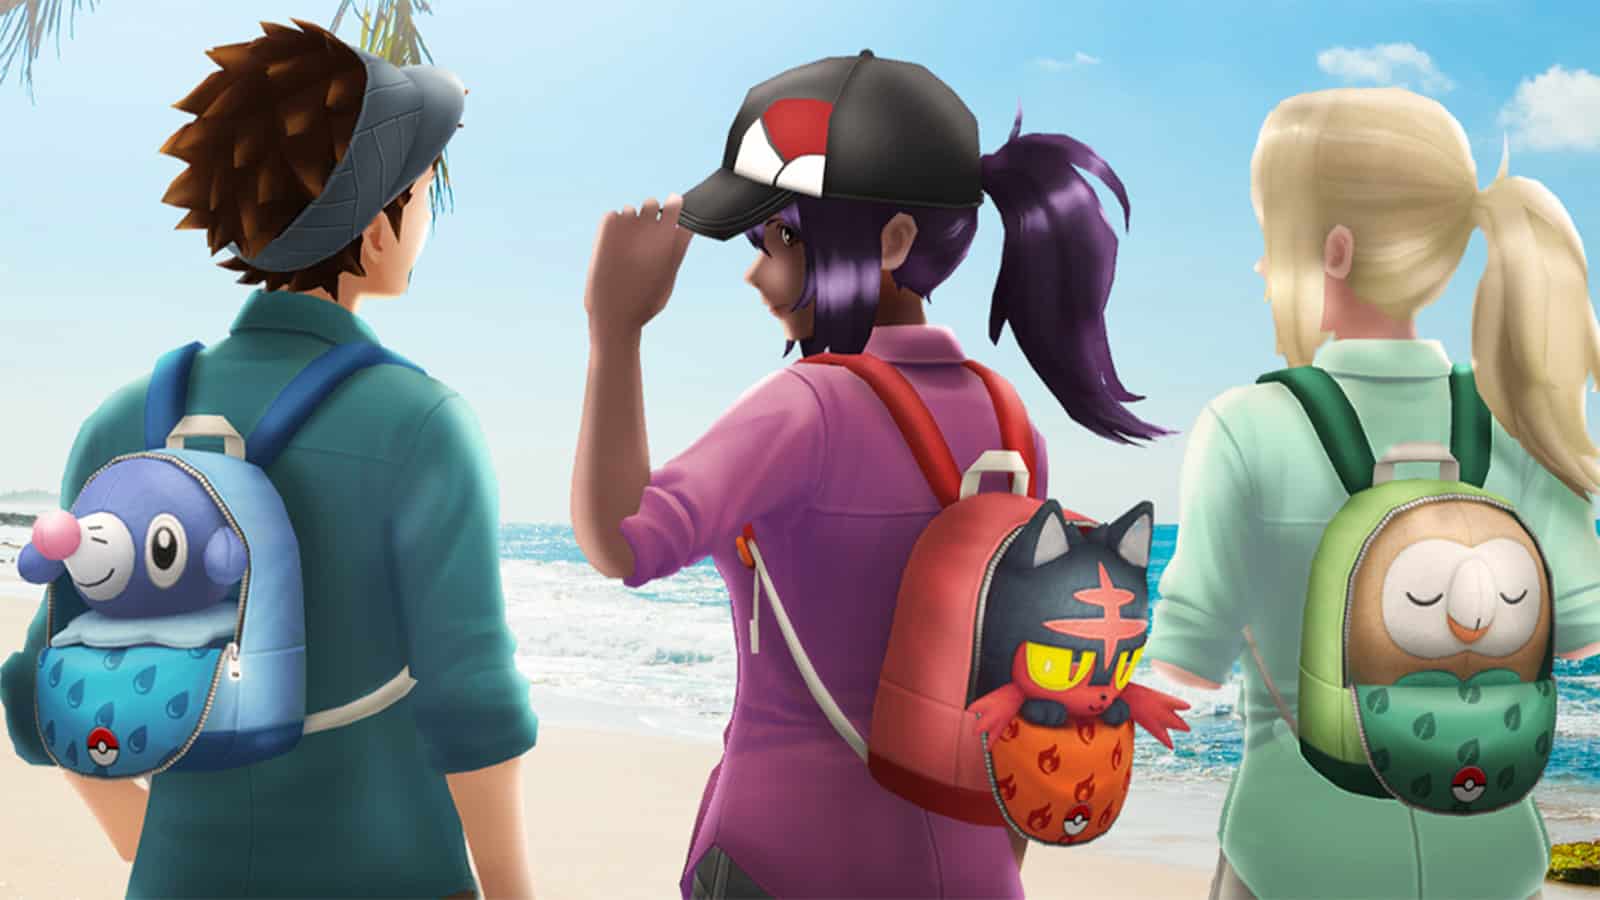 Pokémon: The 5 Best Things About Alola (& 5 That Needed Improvement)